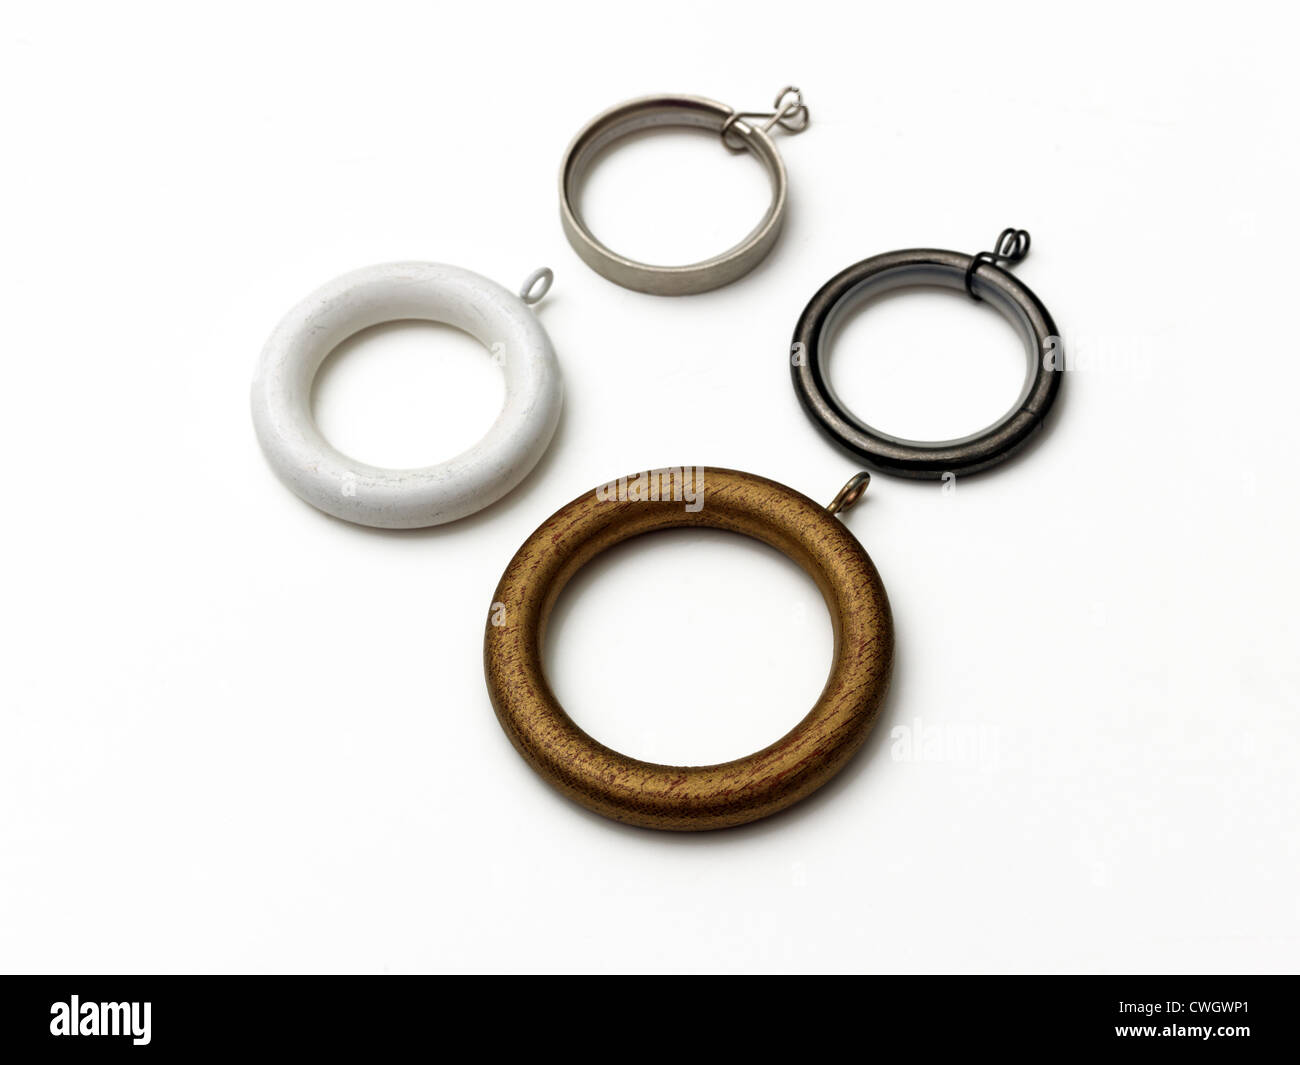 Curtain Rings Metal And Plastic Stock Photo